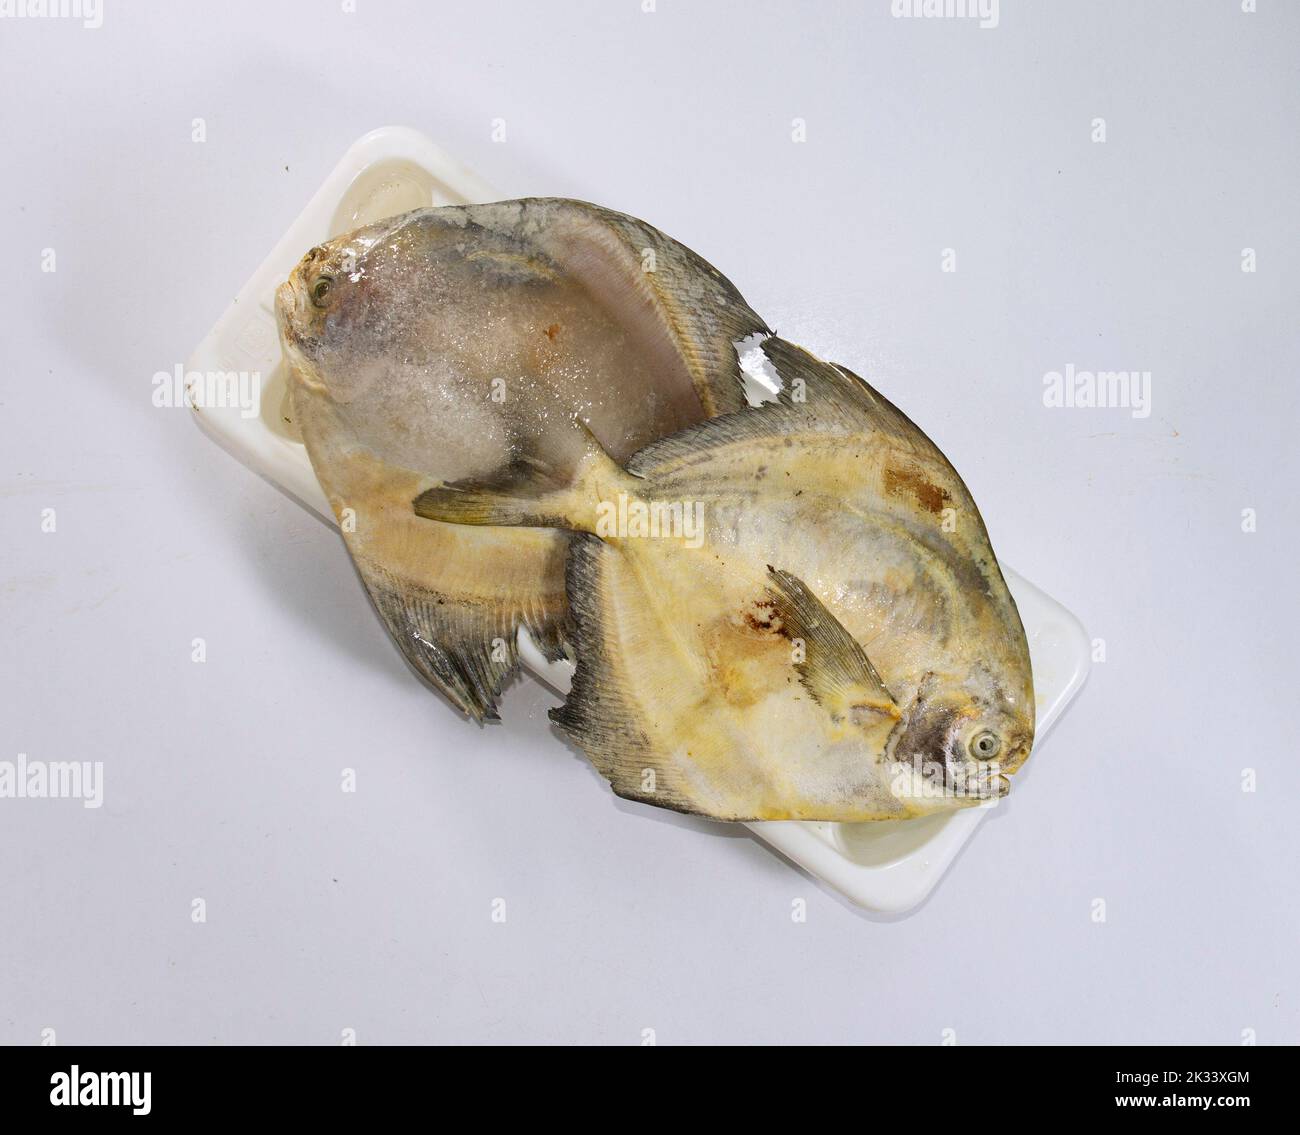 Silver pomfret after long time kept in freezer. not so fresh. Stock Photo